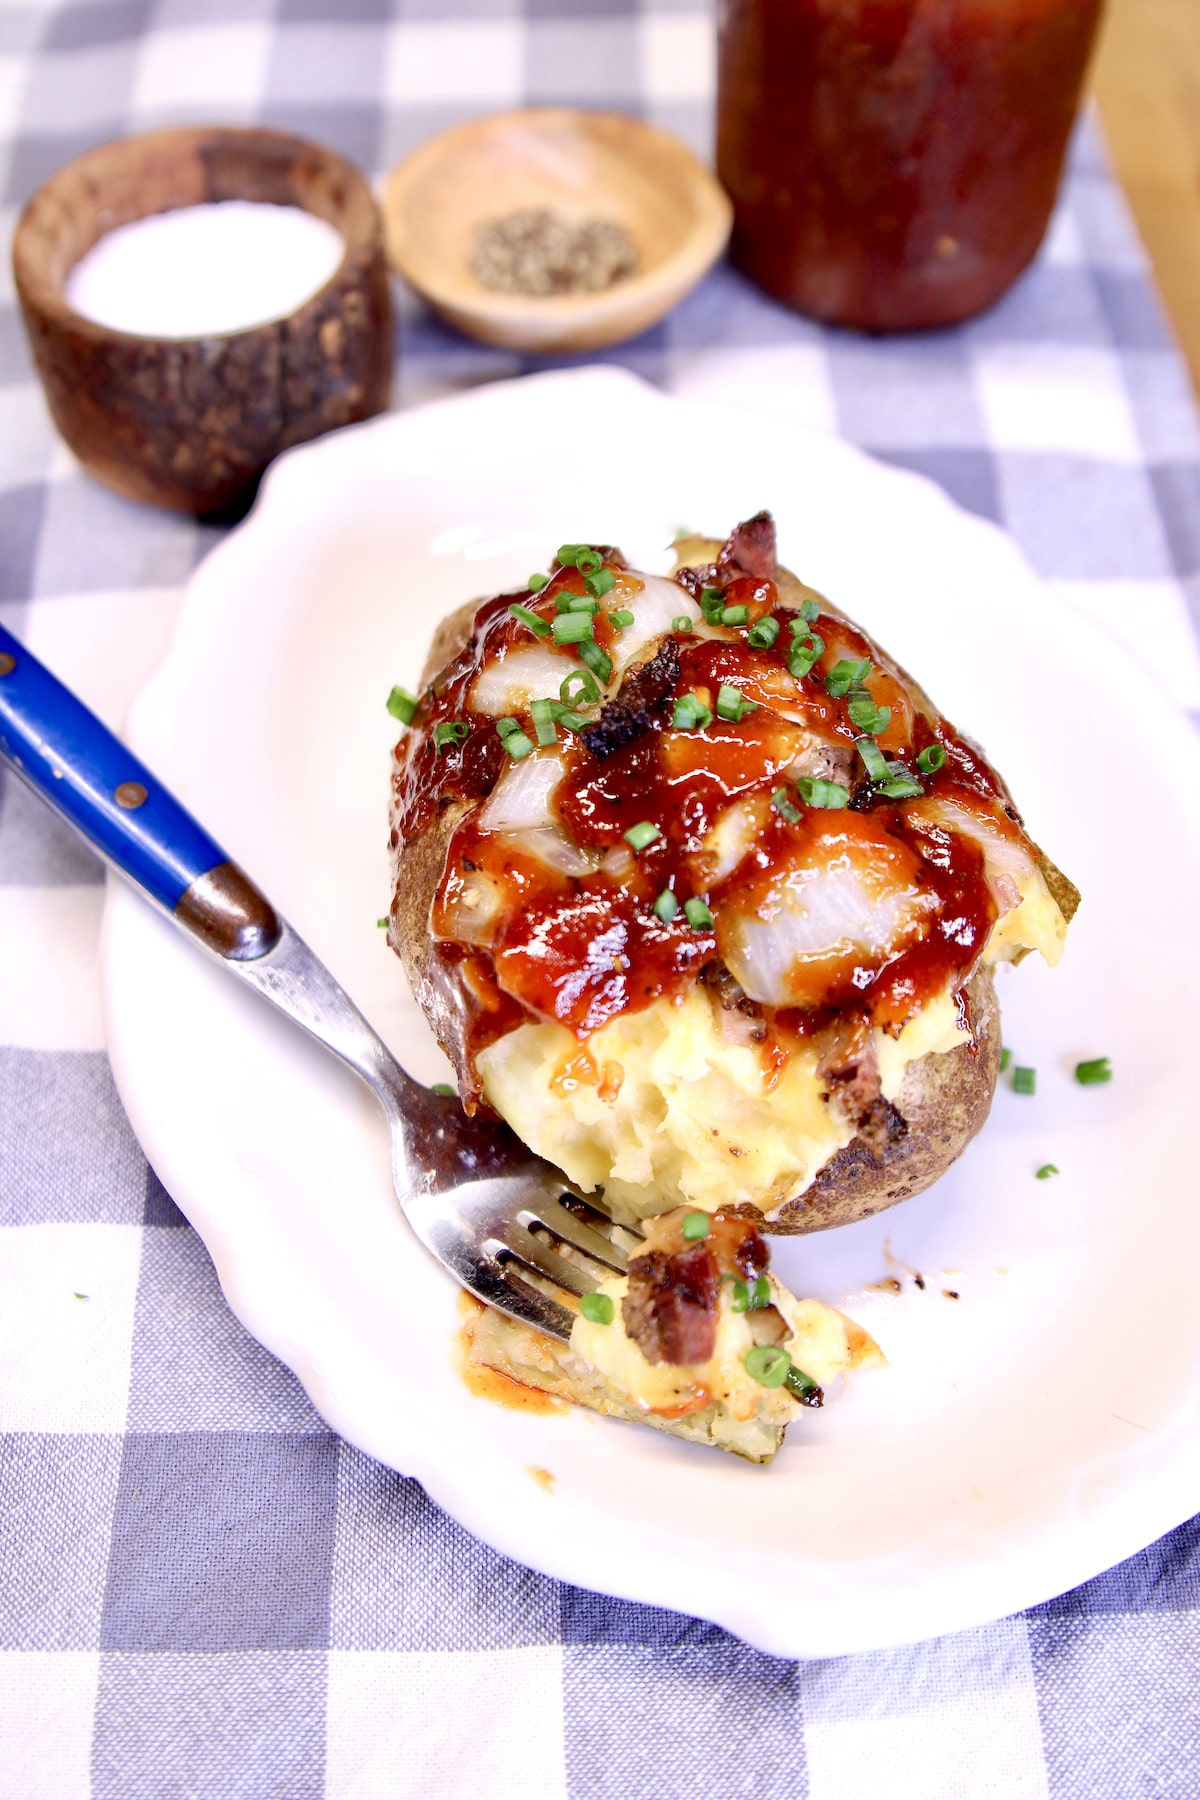 Twice baked potato on a plate with bite on a fork.